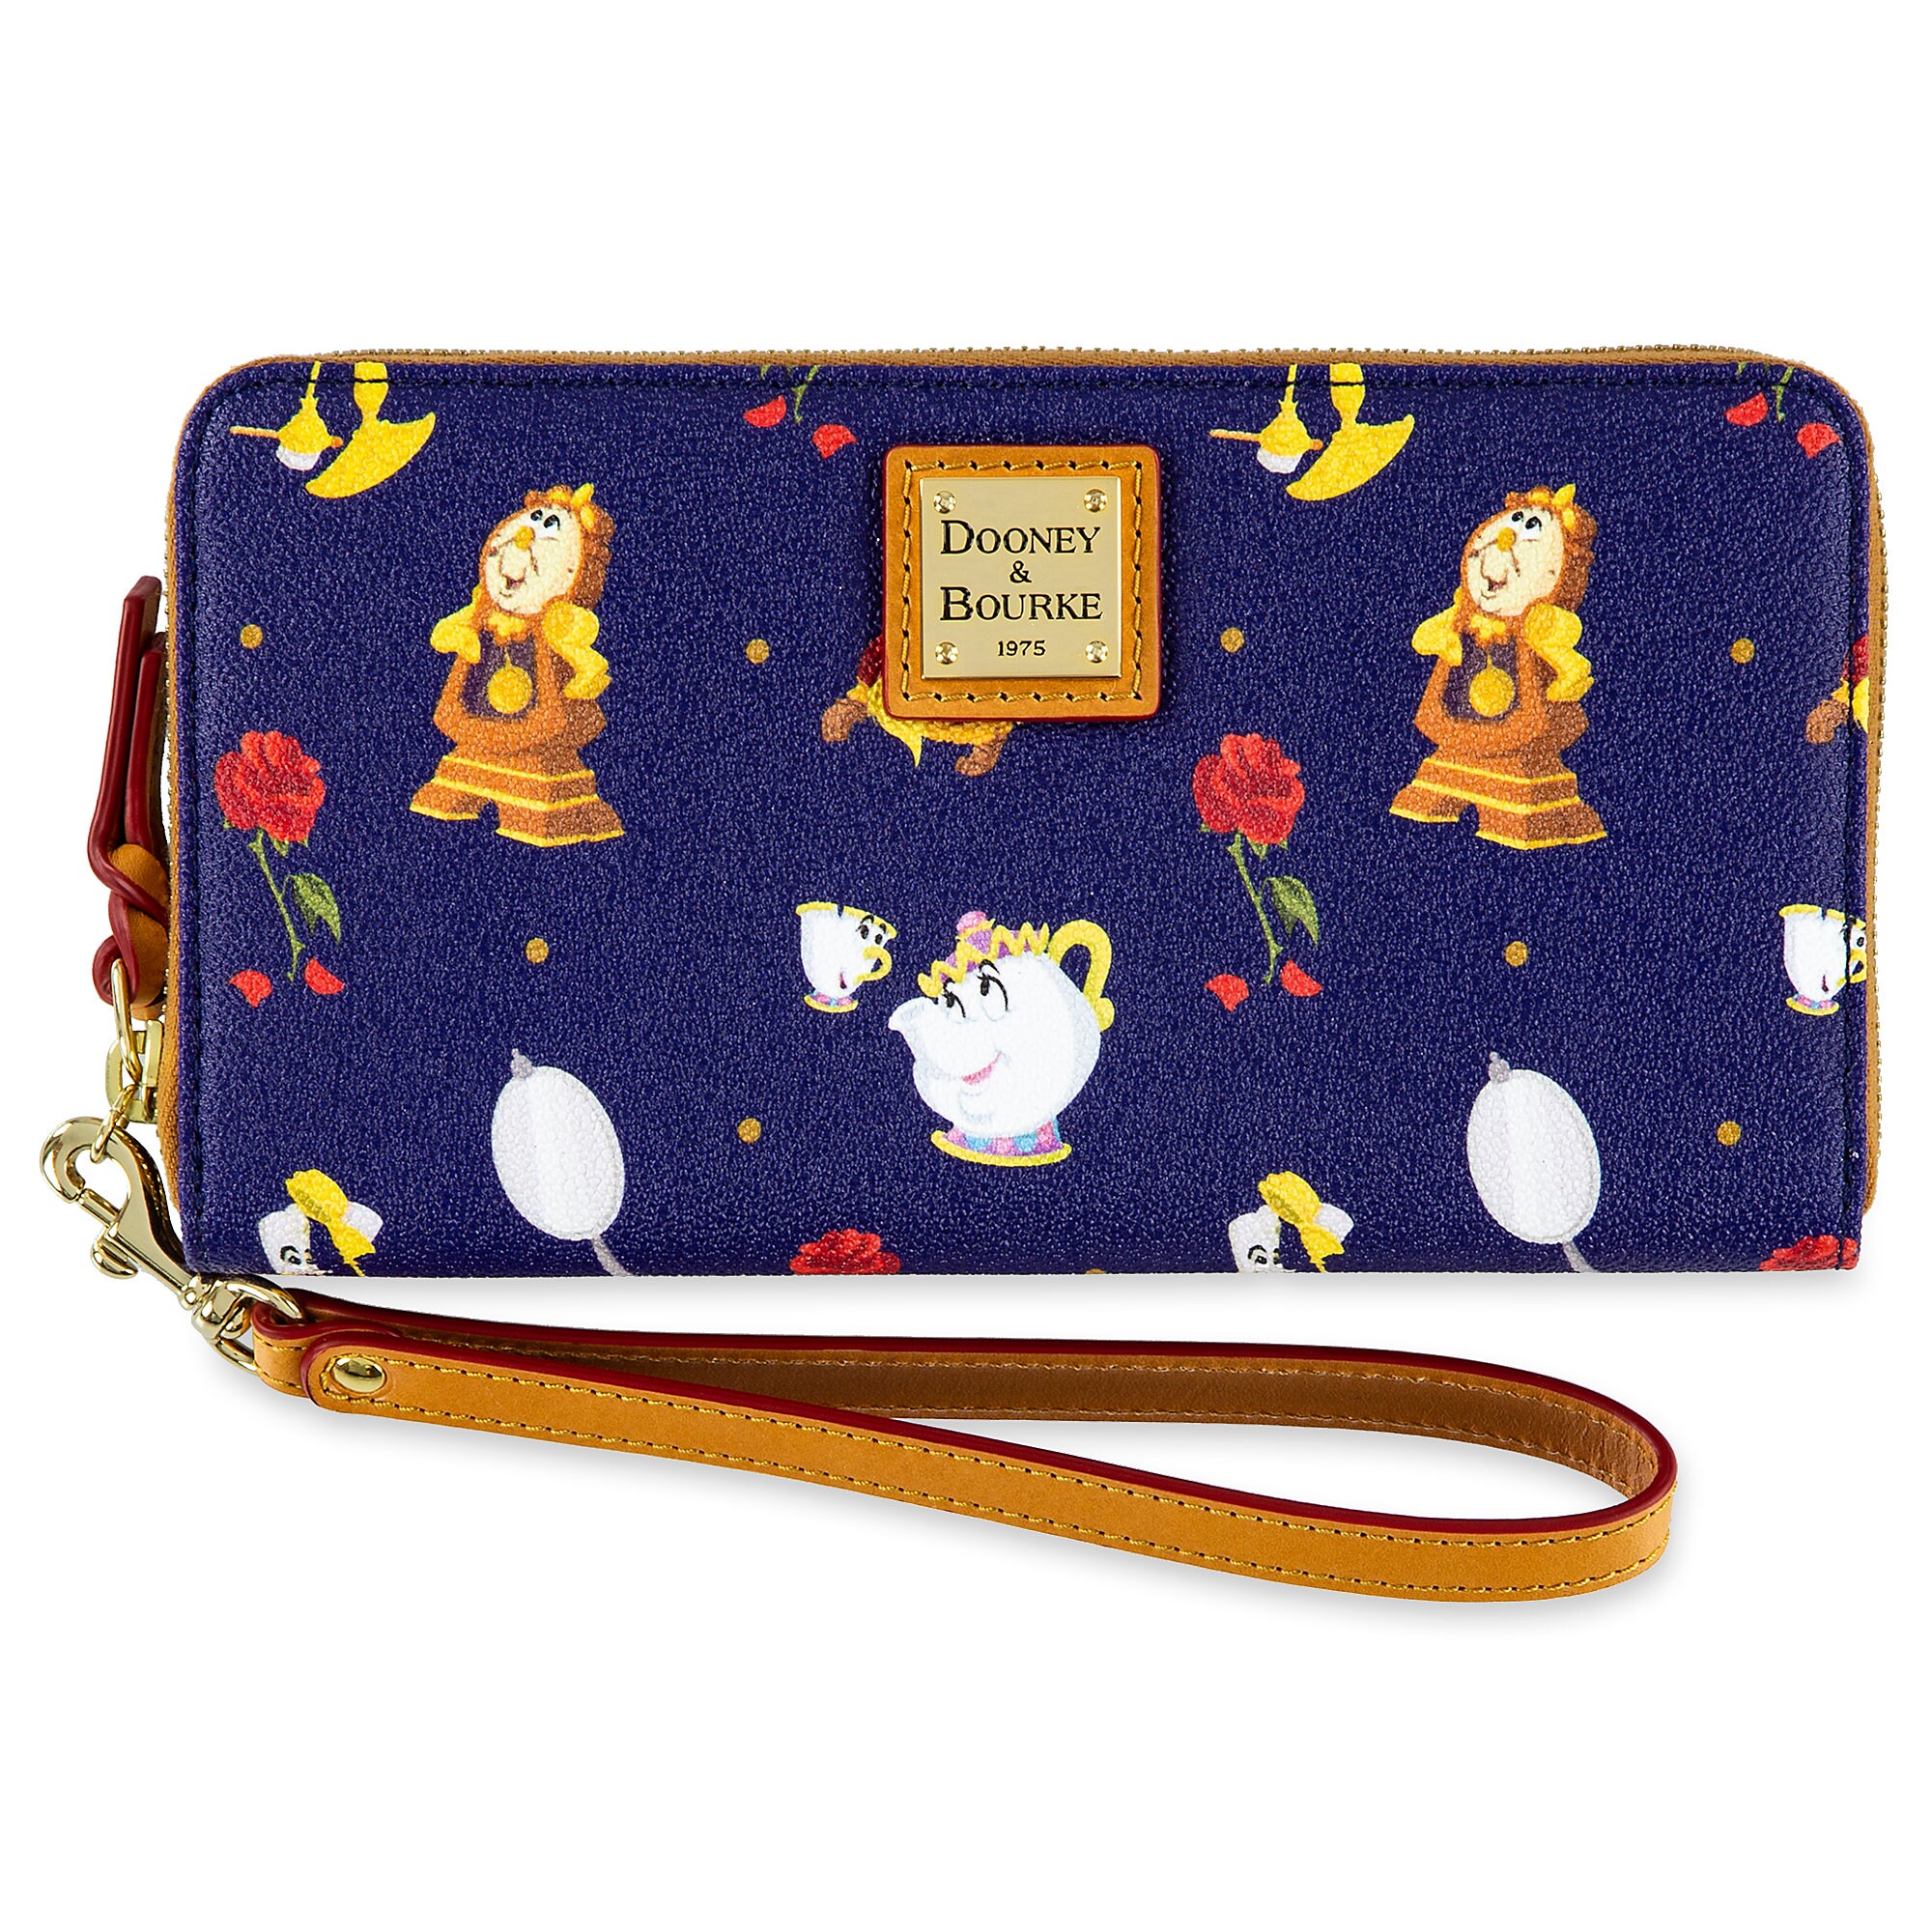 Beauty and the Beast Wallet by Dooney & Bourke